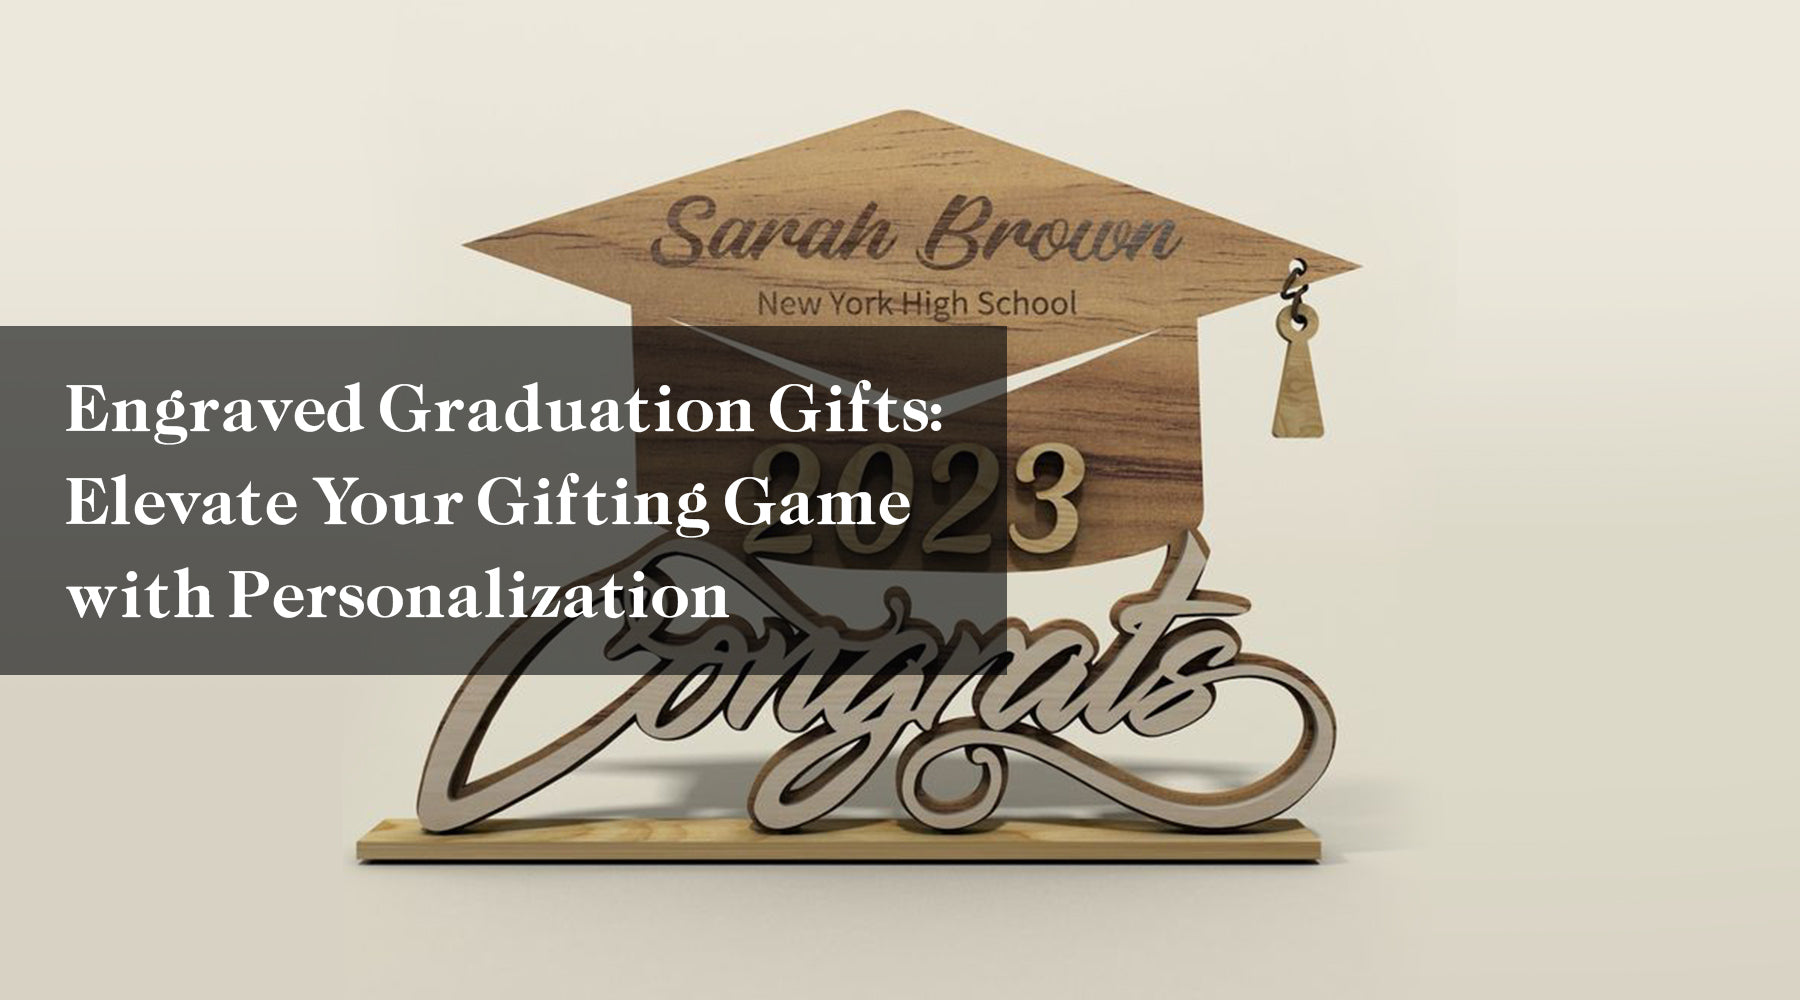 Engraved Graduation Gifts: Elevate Your Gifting Game with Personalization